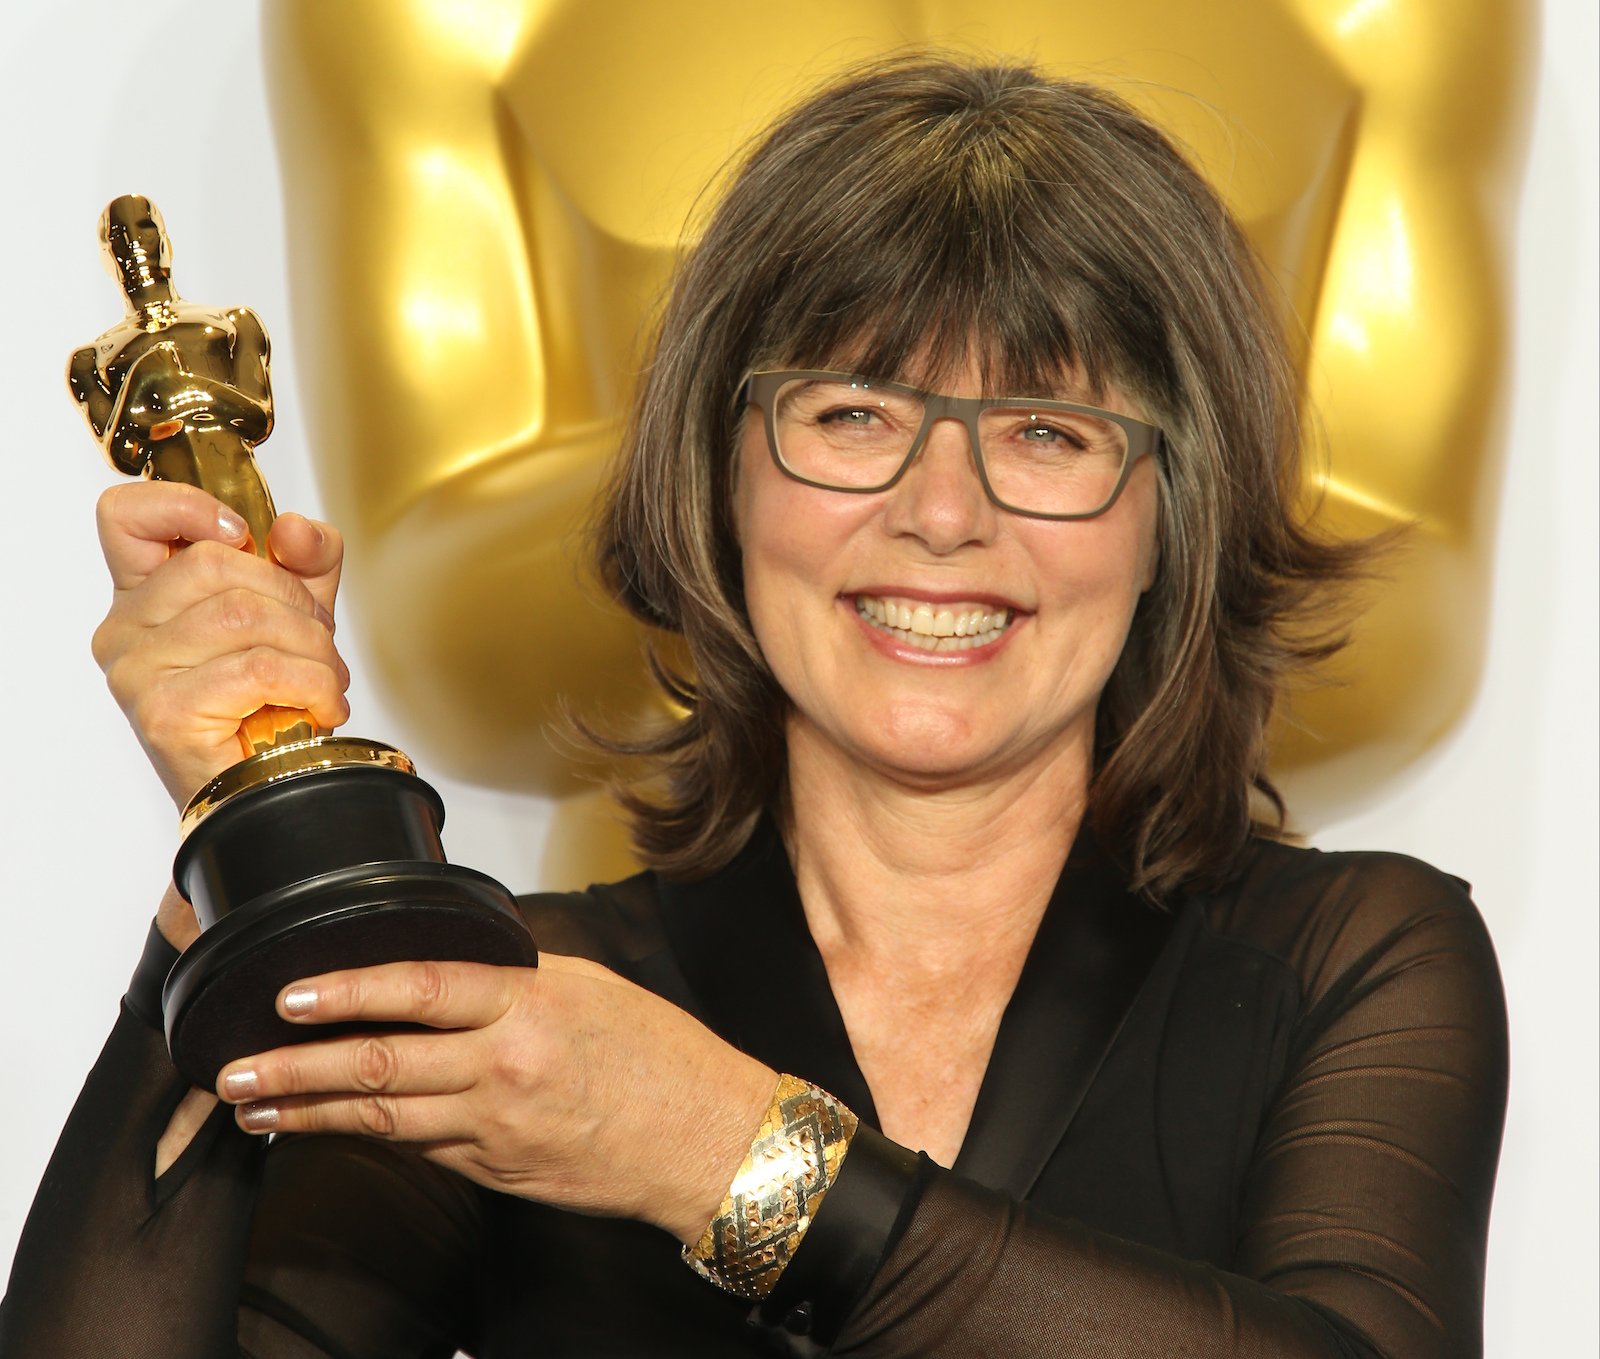 Film editor Margaret Sixel, winner of the Best Film Editing award for 'Mad Max: Fury Road,' poses in the press room at the 88th Annual Academy Awards at Hollywood & Highland Center on February 28, 2016 in Hollywood, California.